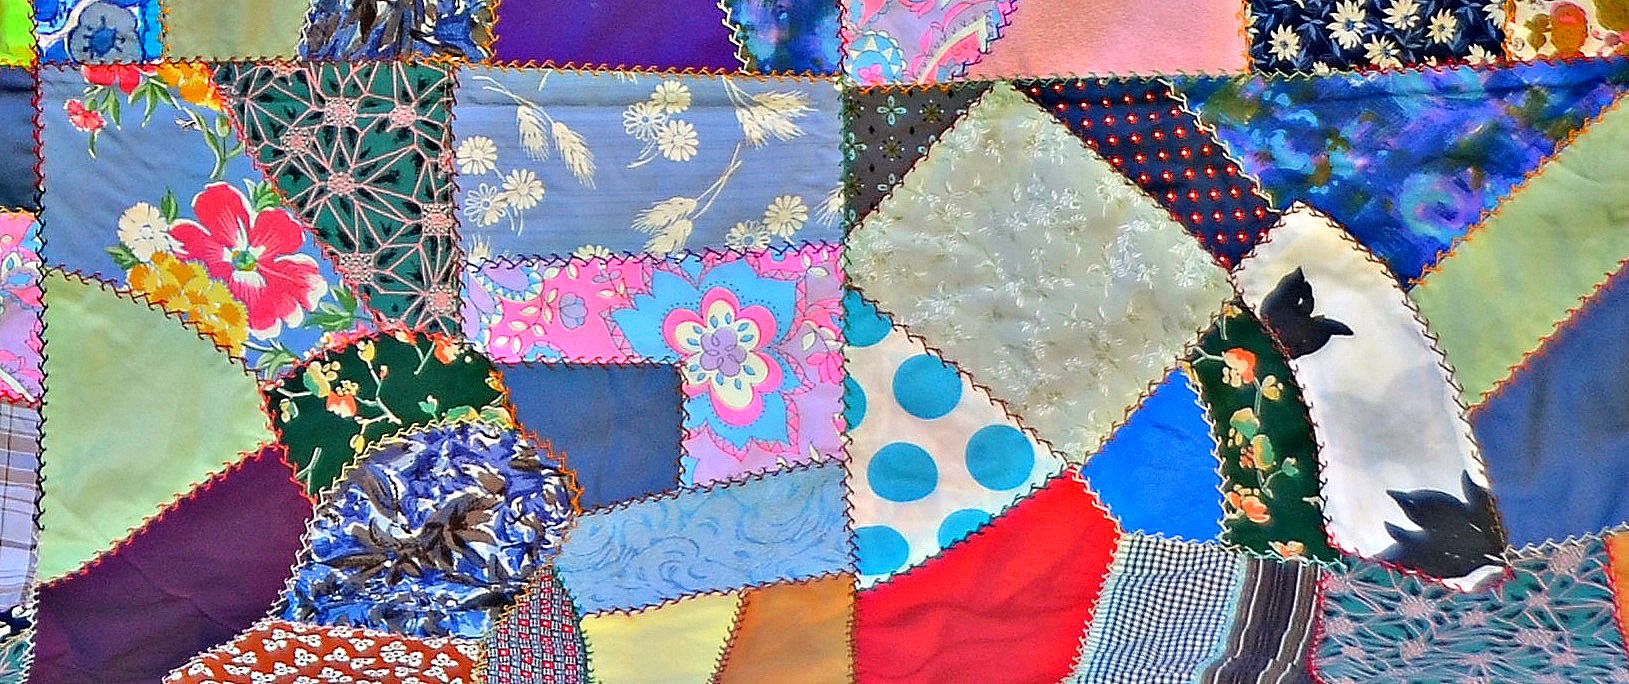 Creativity is like a crazy quilt. Each piece of fabric, disparate in color and pattern, stitched together.